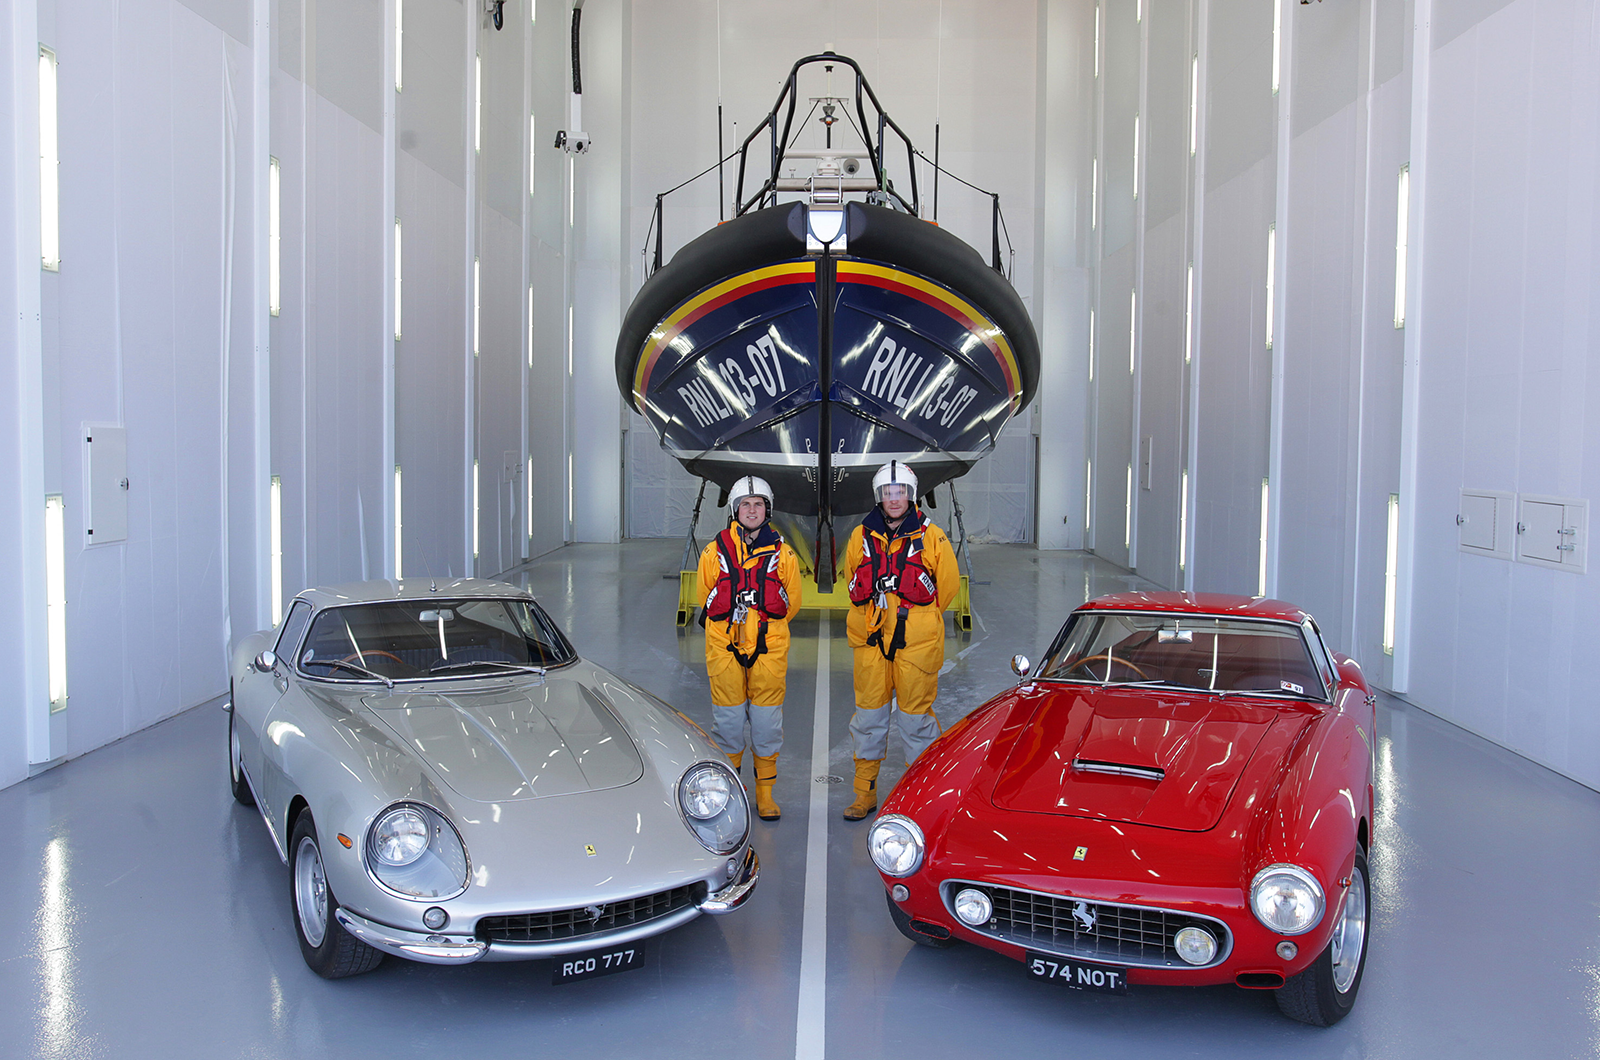 Classic & Sports Car – How two Ferraris paid for a new RNLI lifeboat